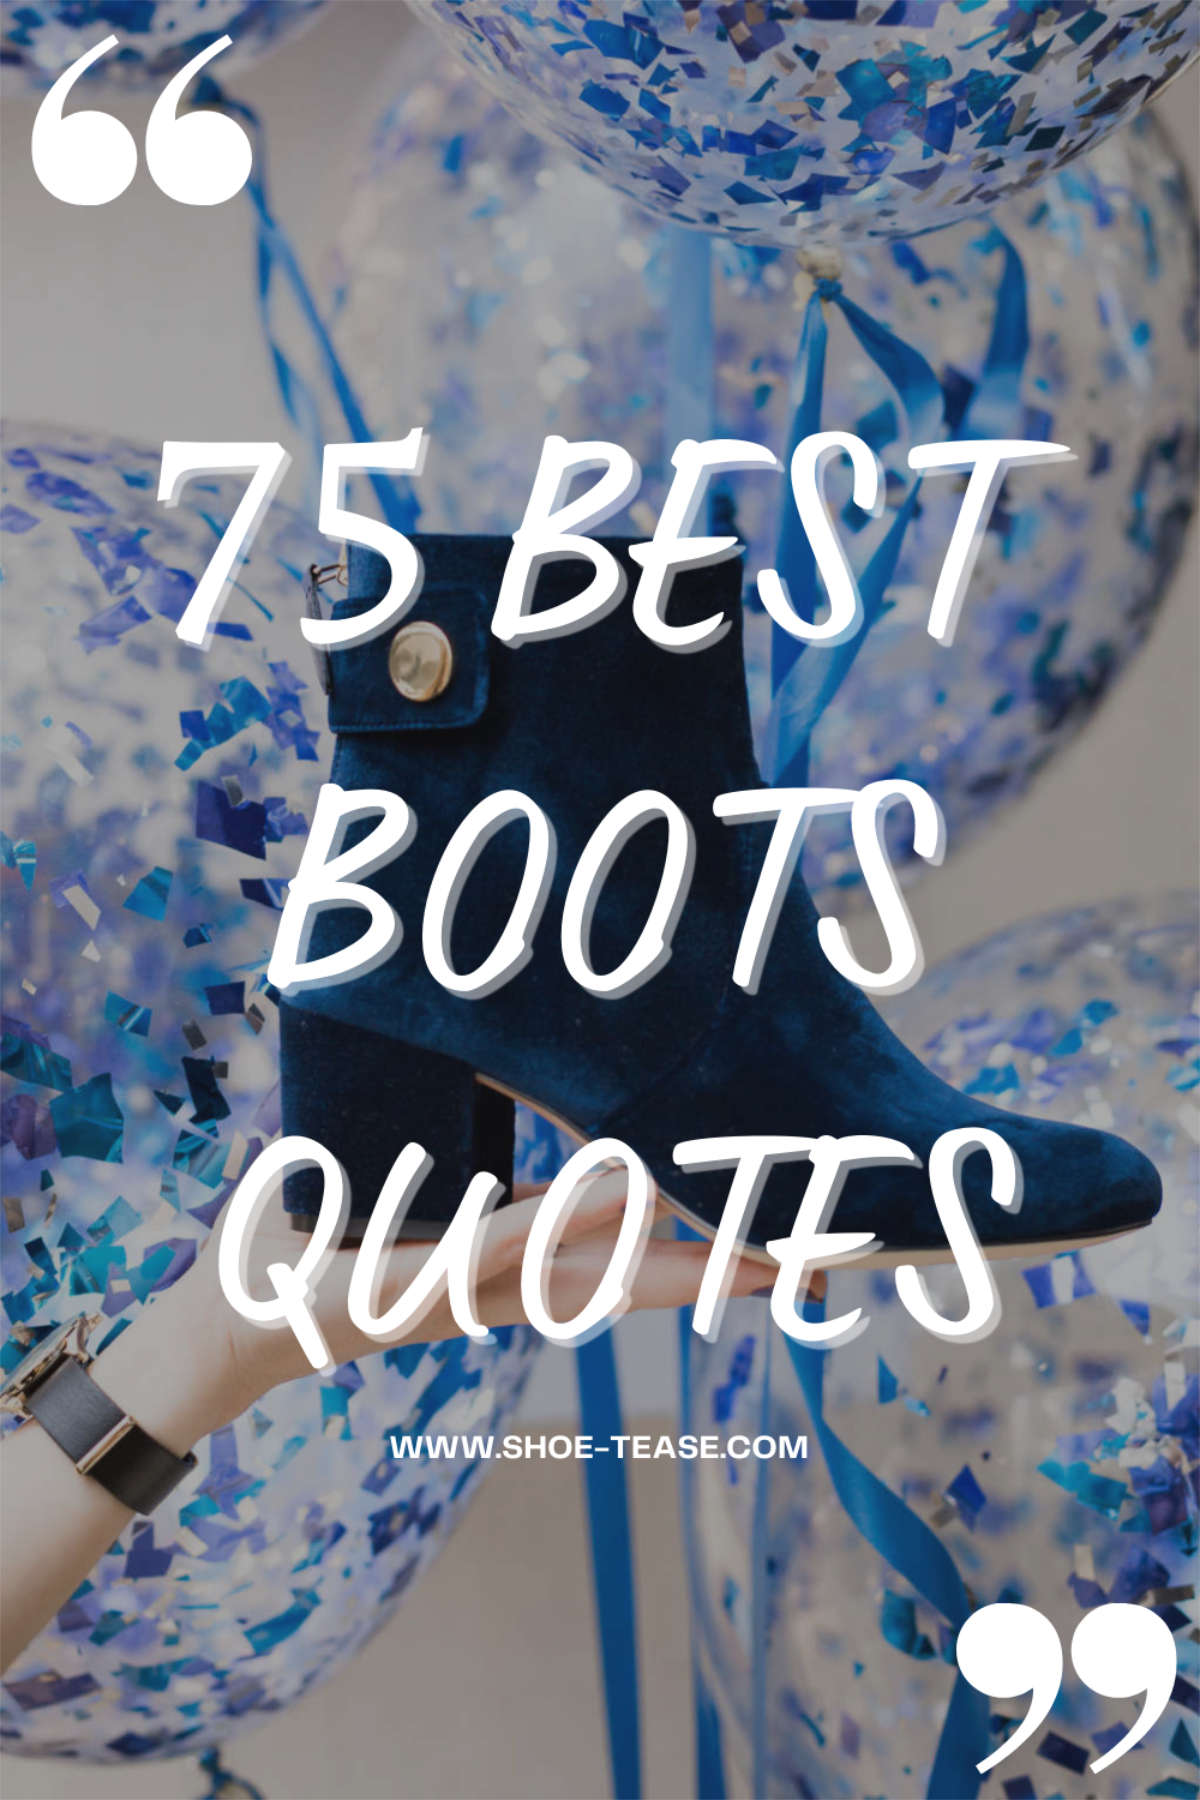 Text 75 best boots quotes over Woman's hand holding blue velvet ankle boot in front of balloons.